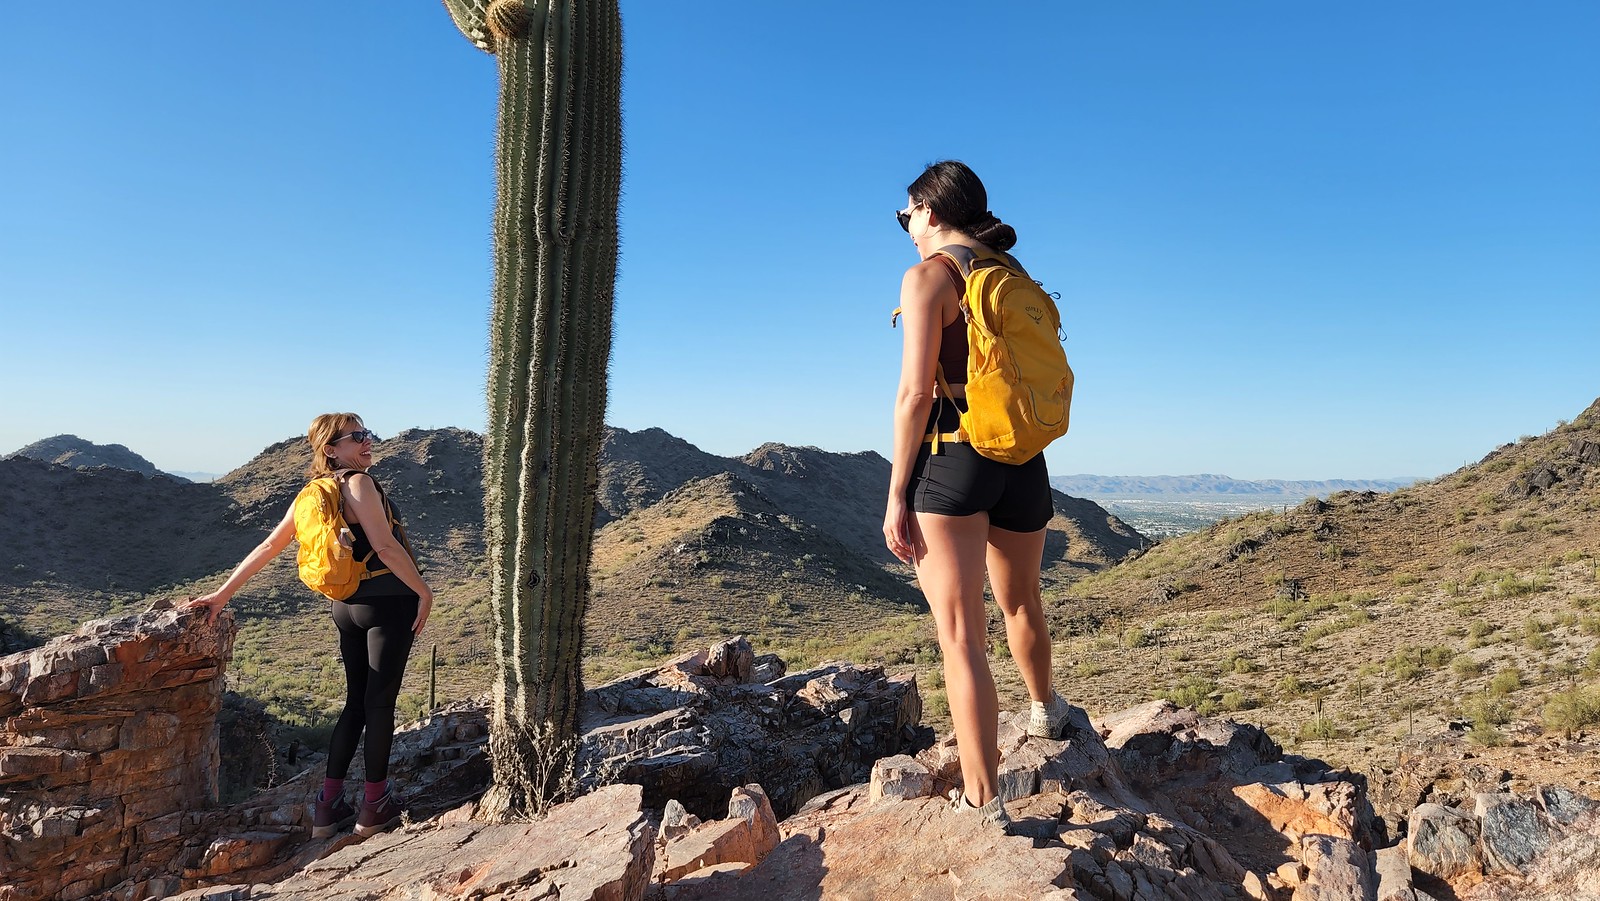 Phoenix hiking tours: Here comes the Boom! | Wild Bunch Desert Guides